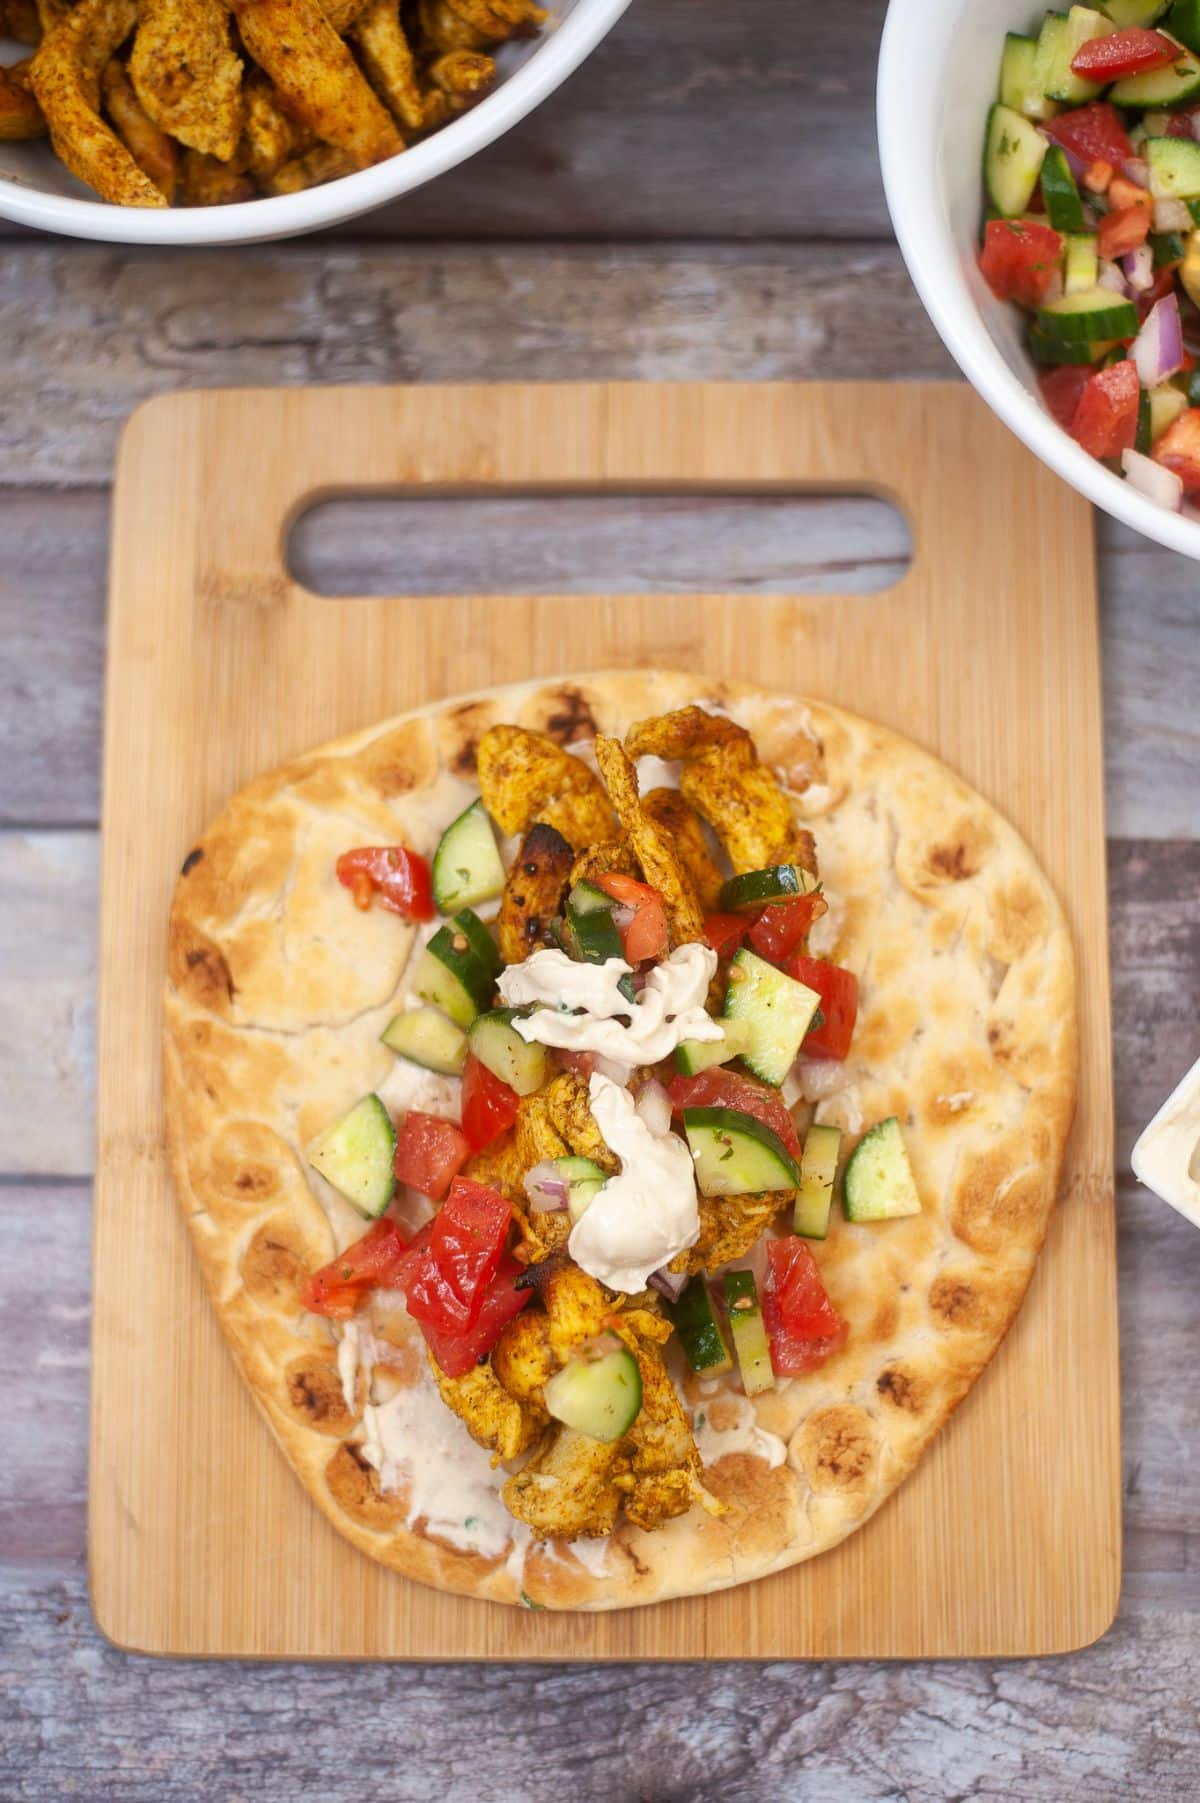 pita bread, lemon tahini sauce, chicken slices, and salad arranged on a wooden chopping board.